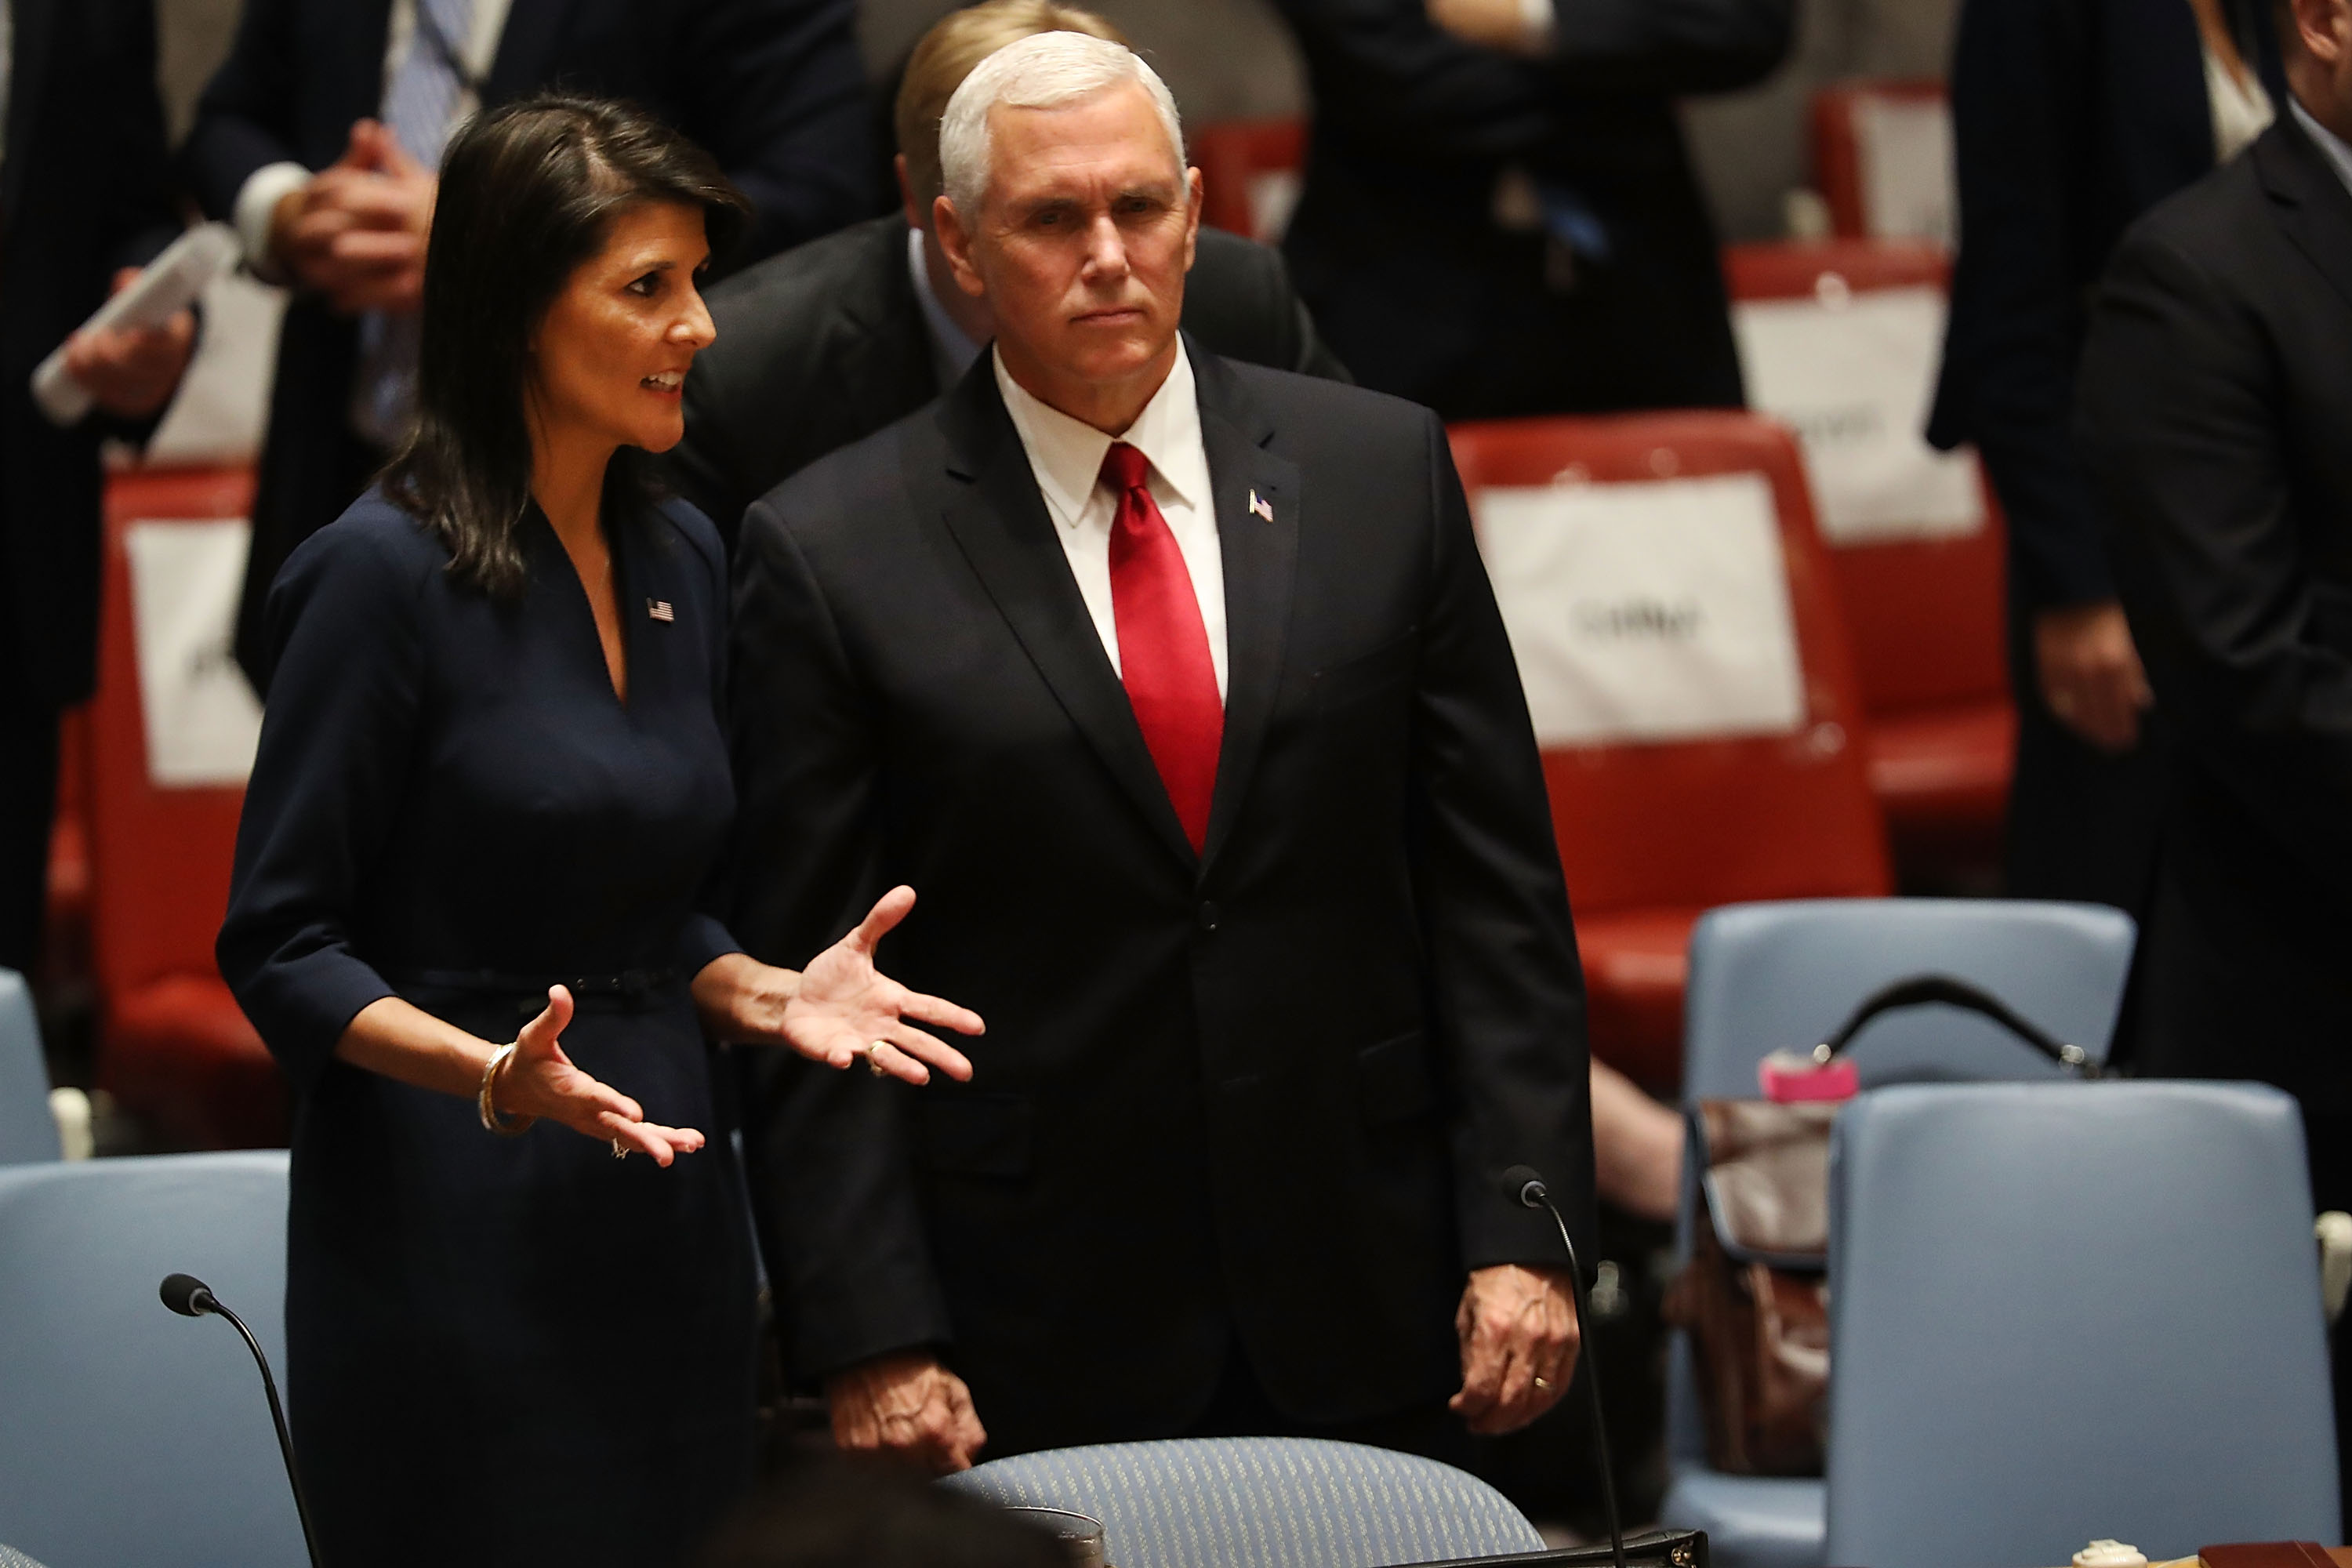 U.S. Vice President Mike Pence stands with then-Ambassador to the United Nations Nikki Haley on September 20, 2017